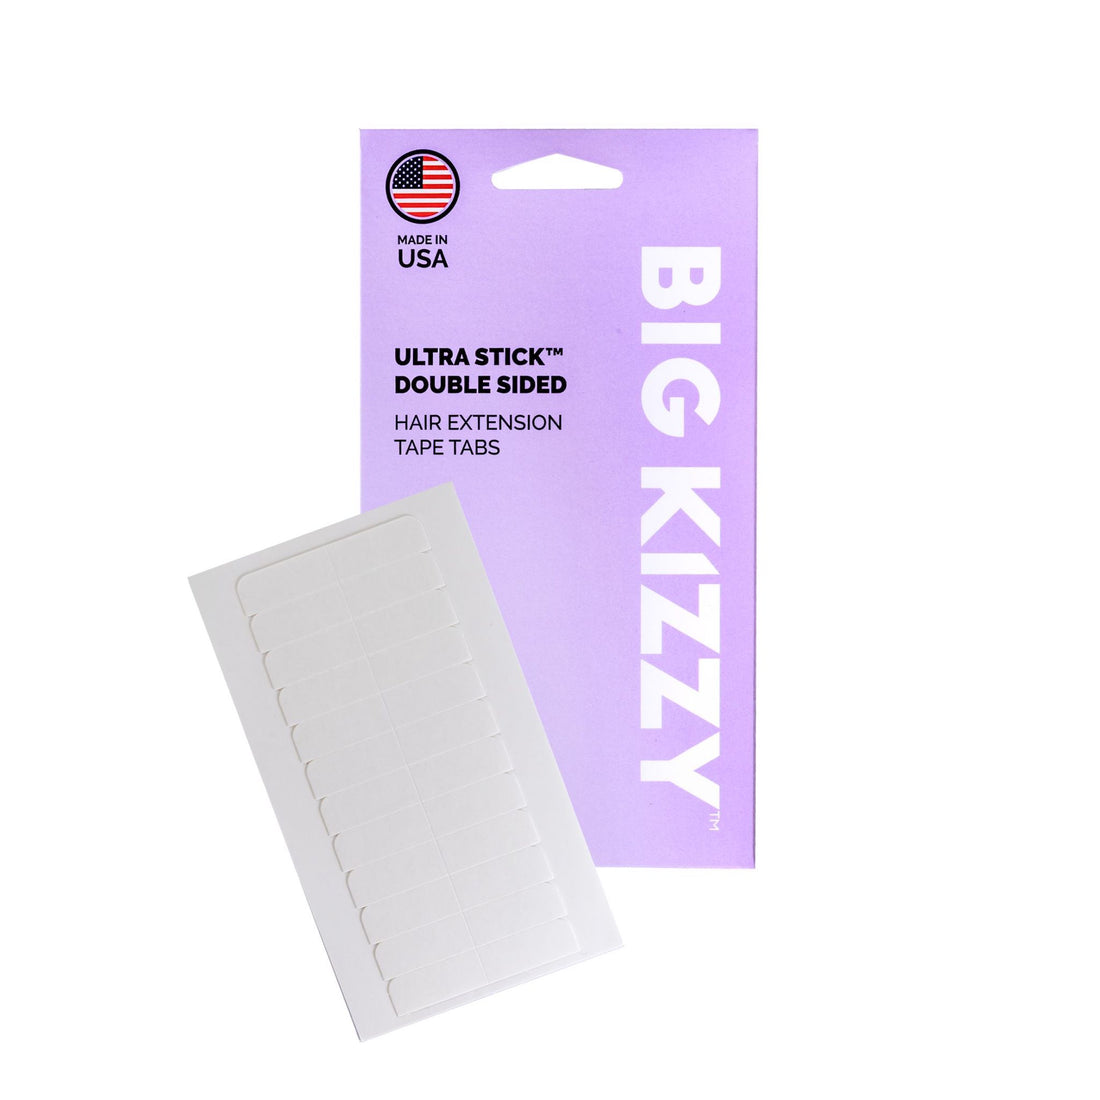 Big Kizzy® Ultra Stick Double Sided Hair Extension Replacement Tape Tabs Packaging with a sheet of double sided tape tabs overlayed on top of it